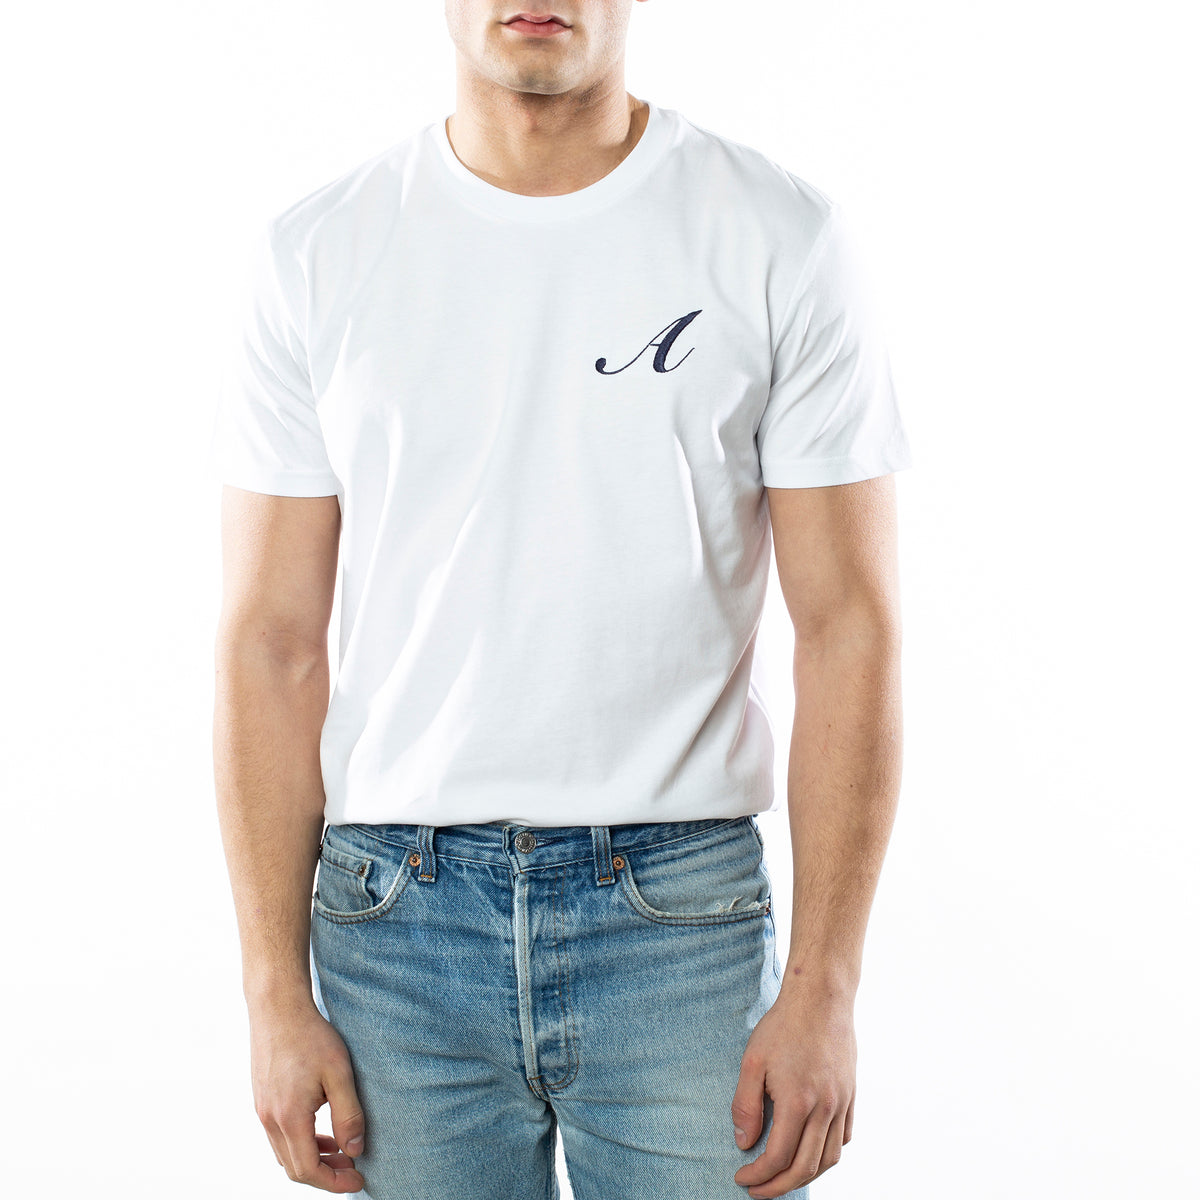 Personalized ANCLADEMAR White T-Shirt